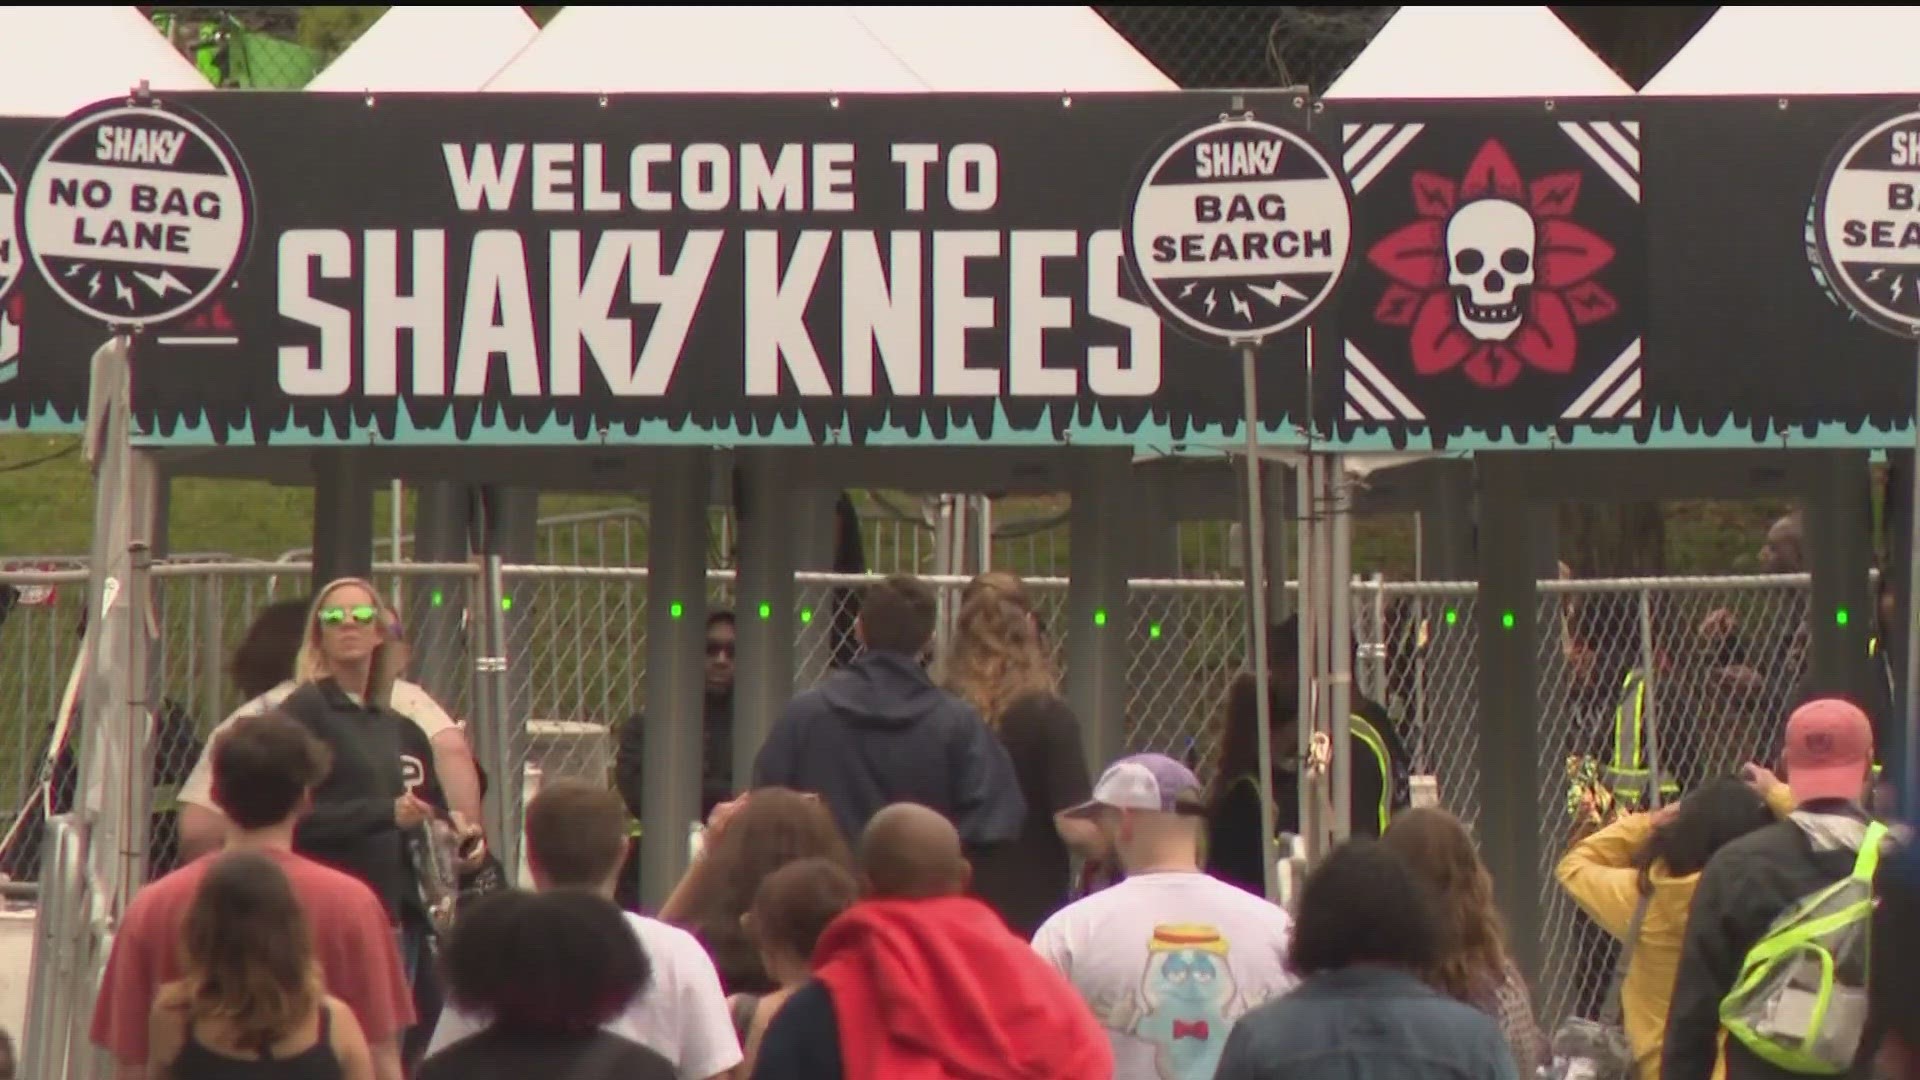 Shaky Knees music festival is officially underway. The festival is expected to draw thousands of people to Central Park. Here's what to know.